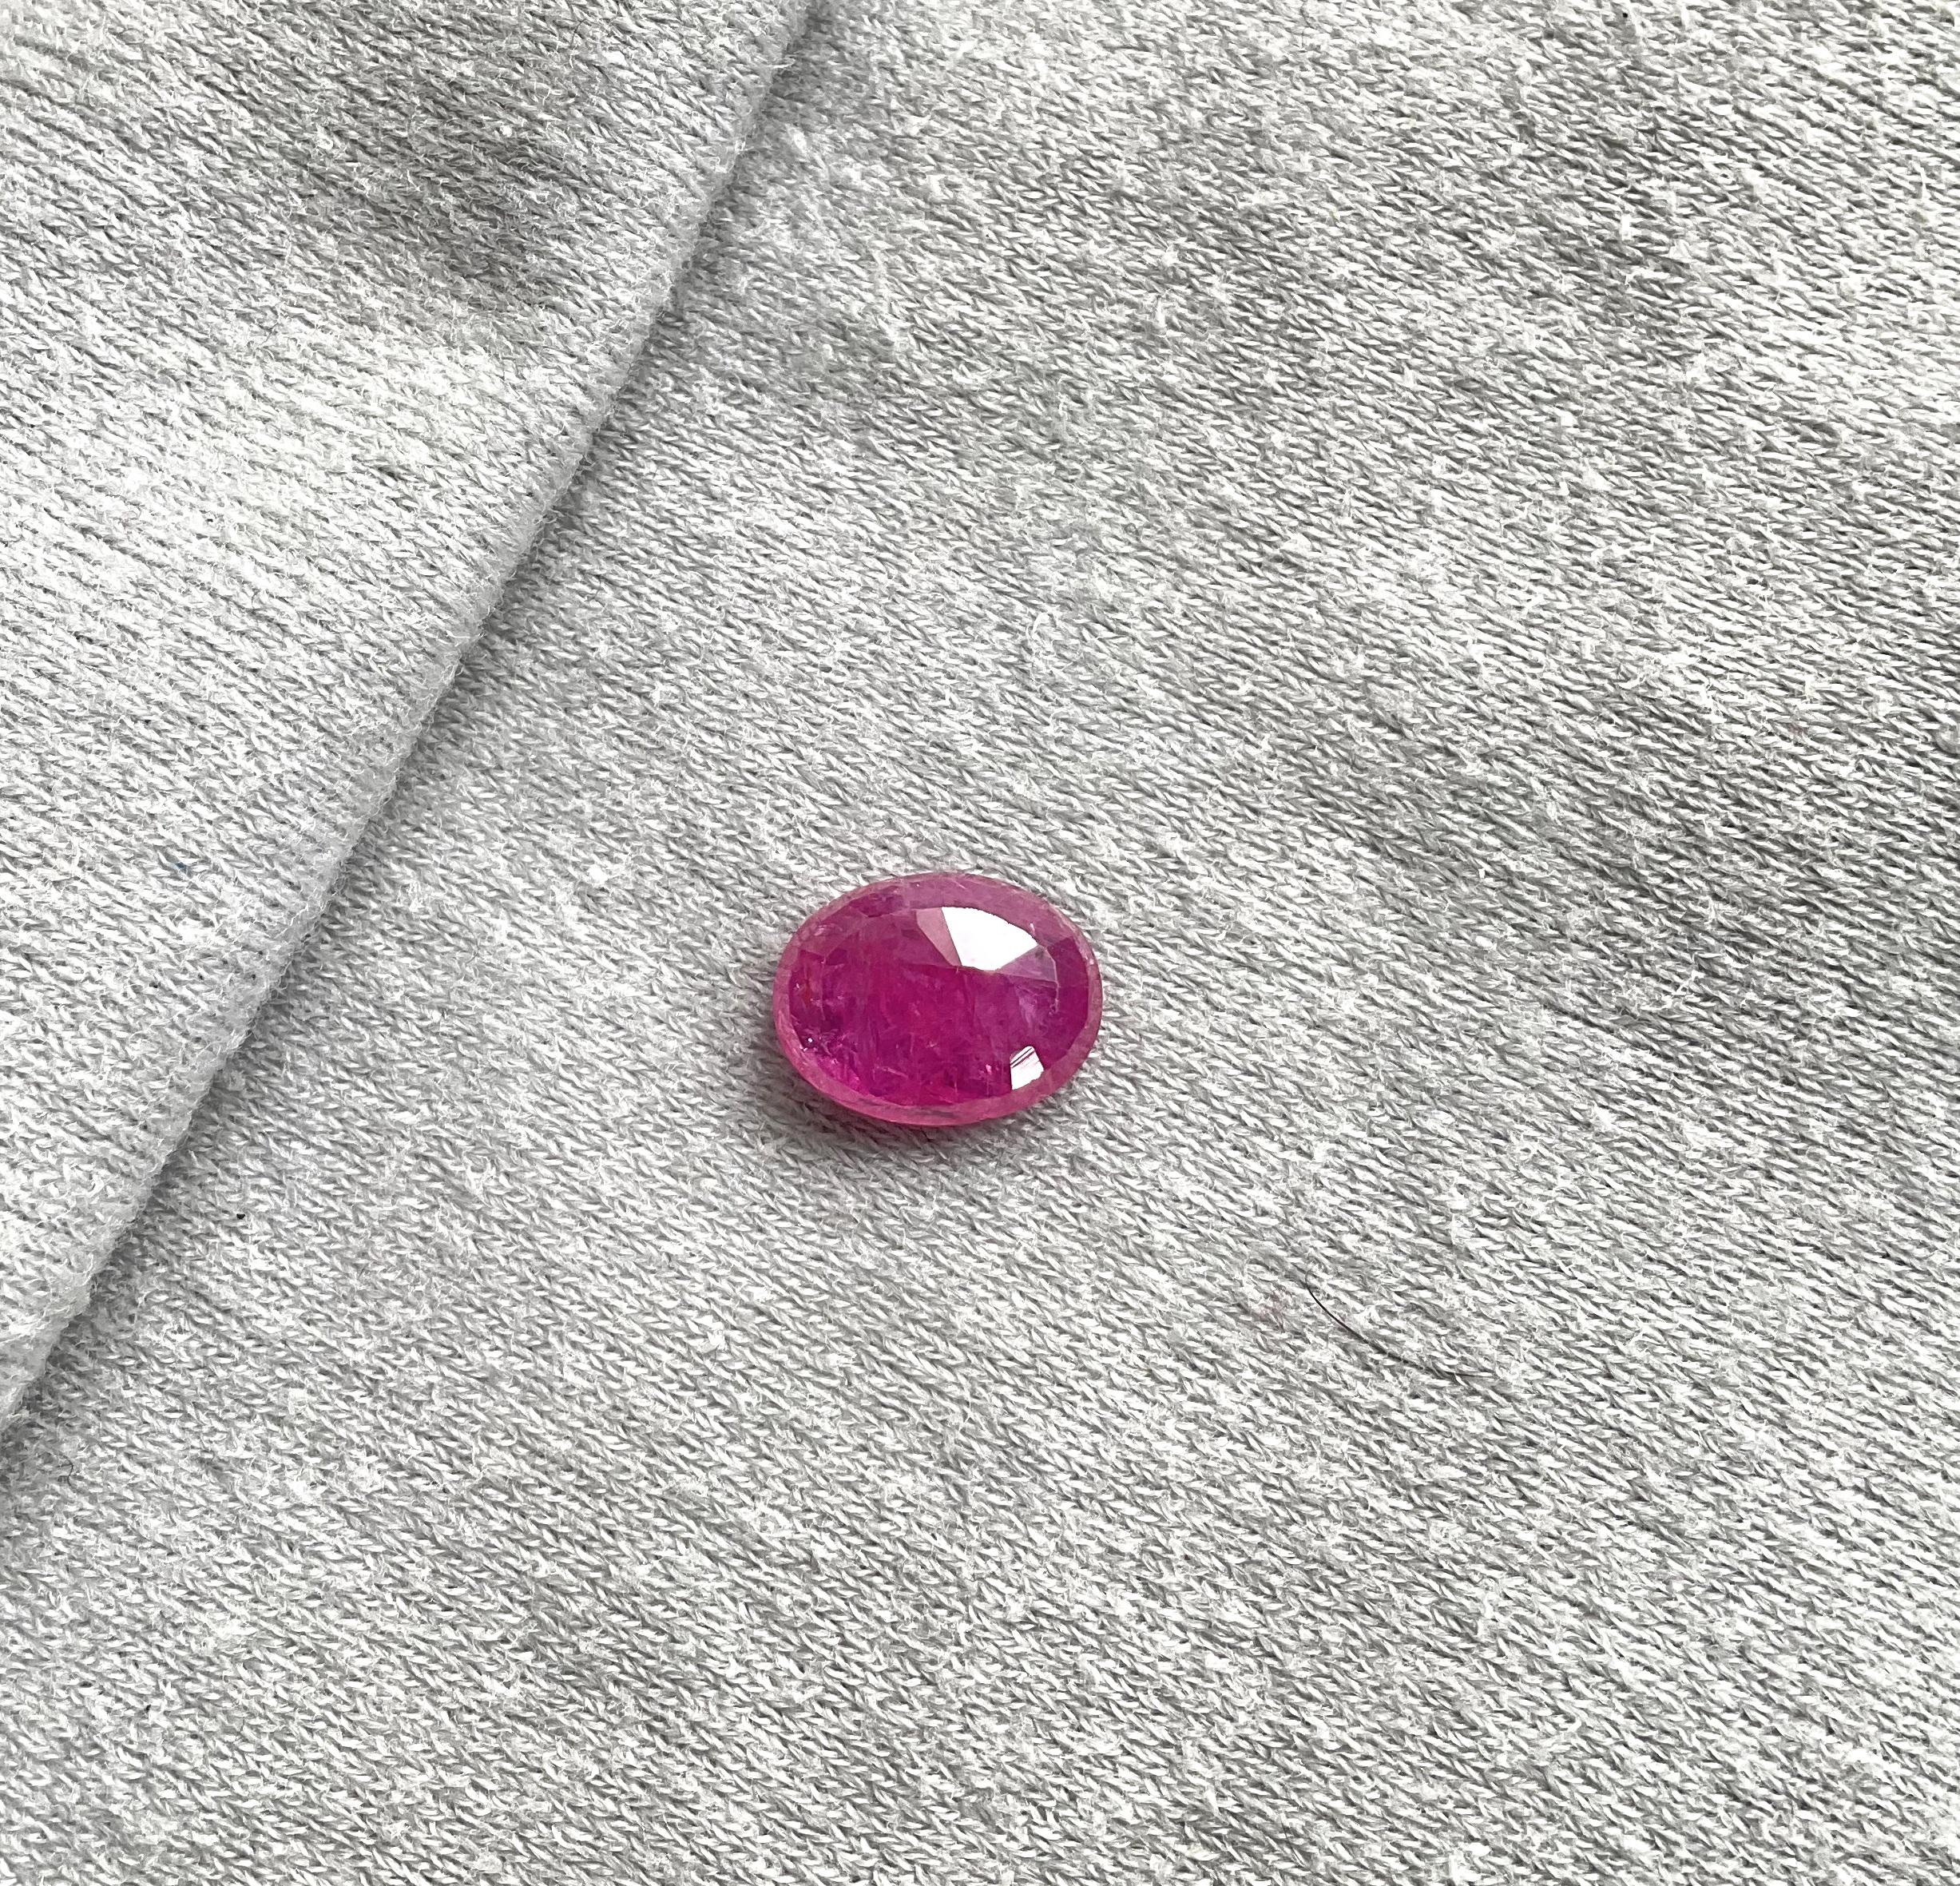 As we are auction partners at Gemfields, we have sourced these rubies from winning auctions and had cut them in our in house manufacturing responsibly.

Weight: 3.66 Carats
Size: 11x8.5x3.5 MM
Pieces: 1
Shape: Faceted oval Cut stone